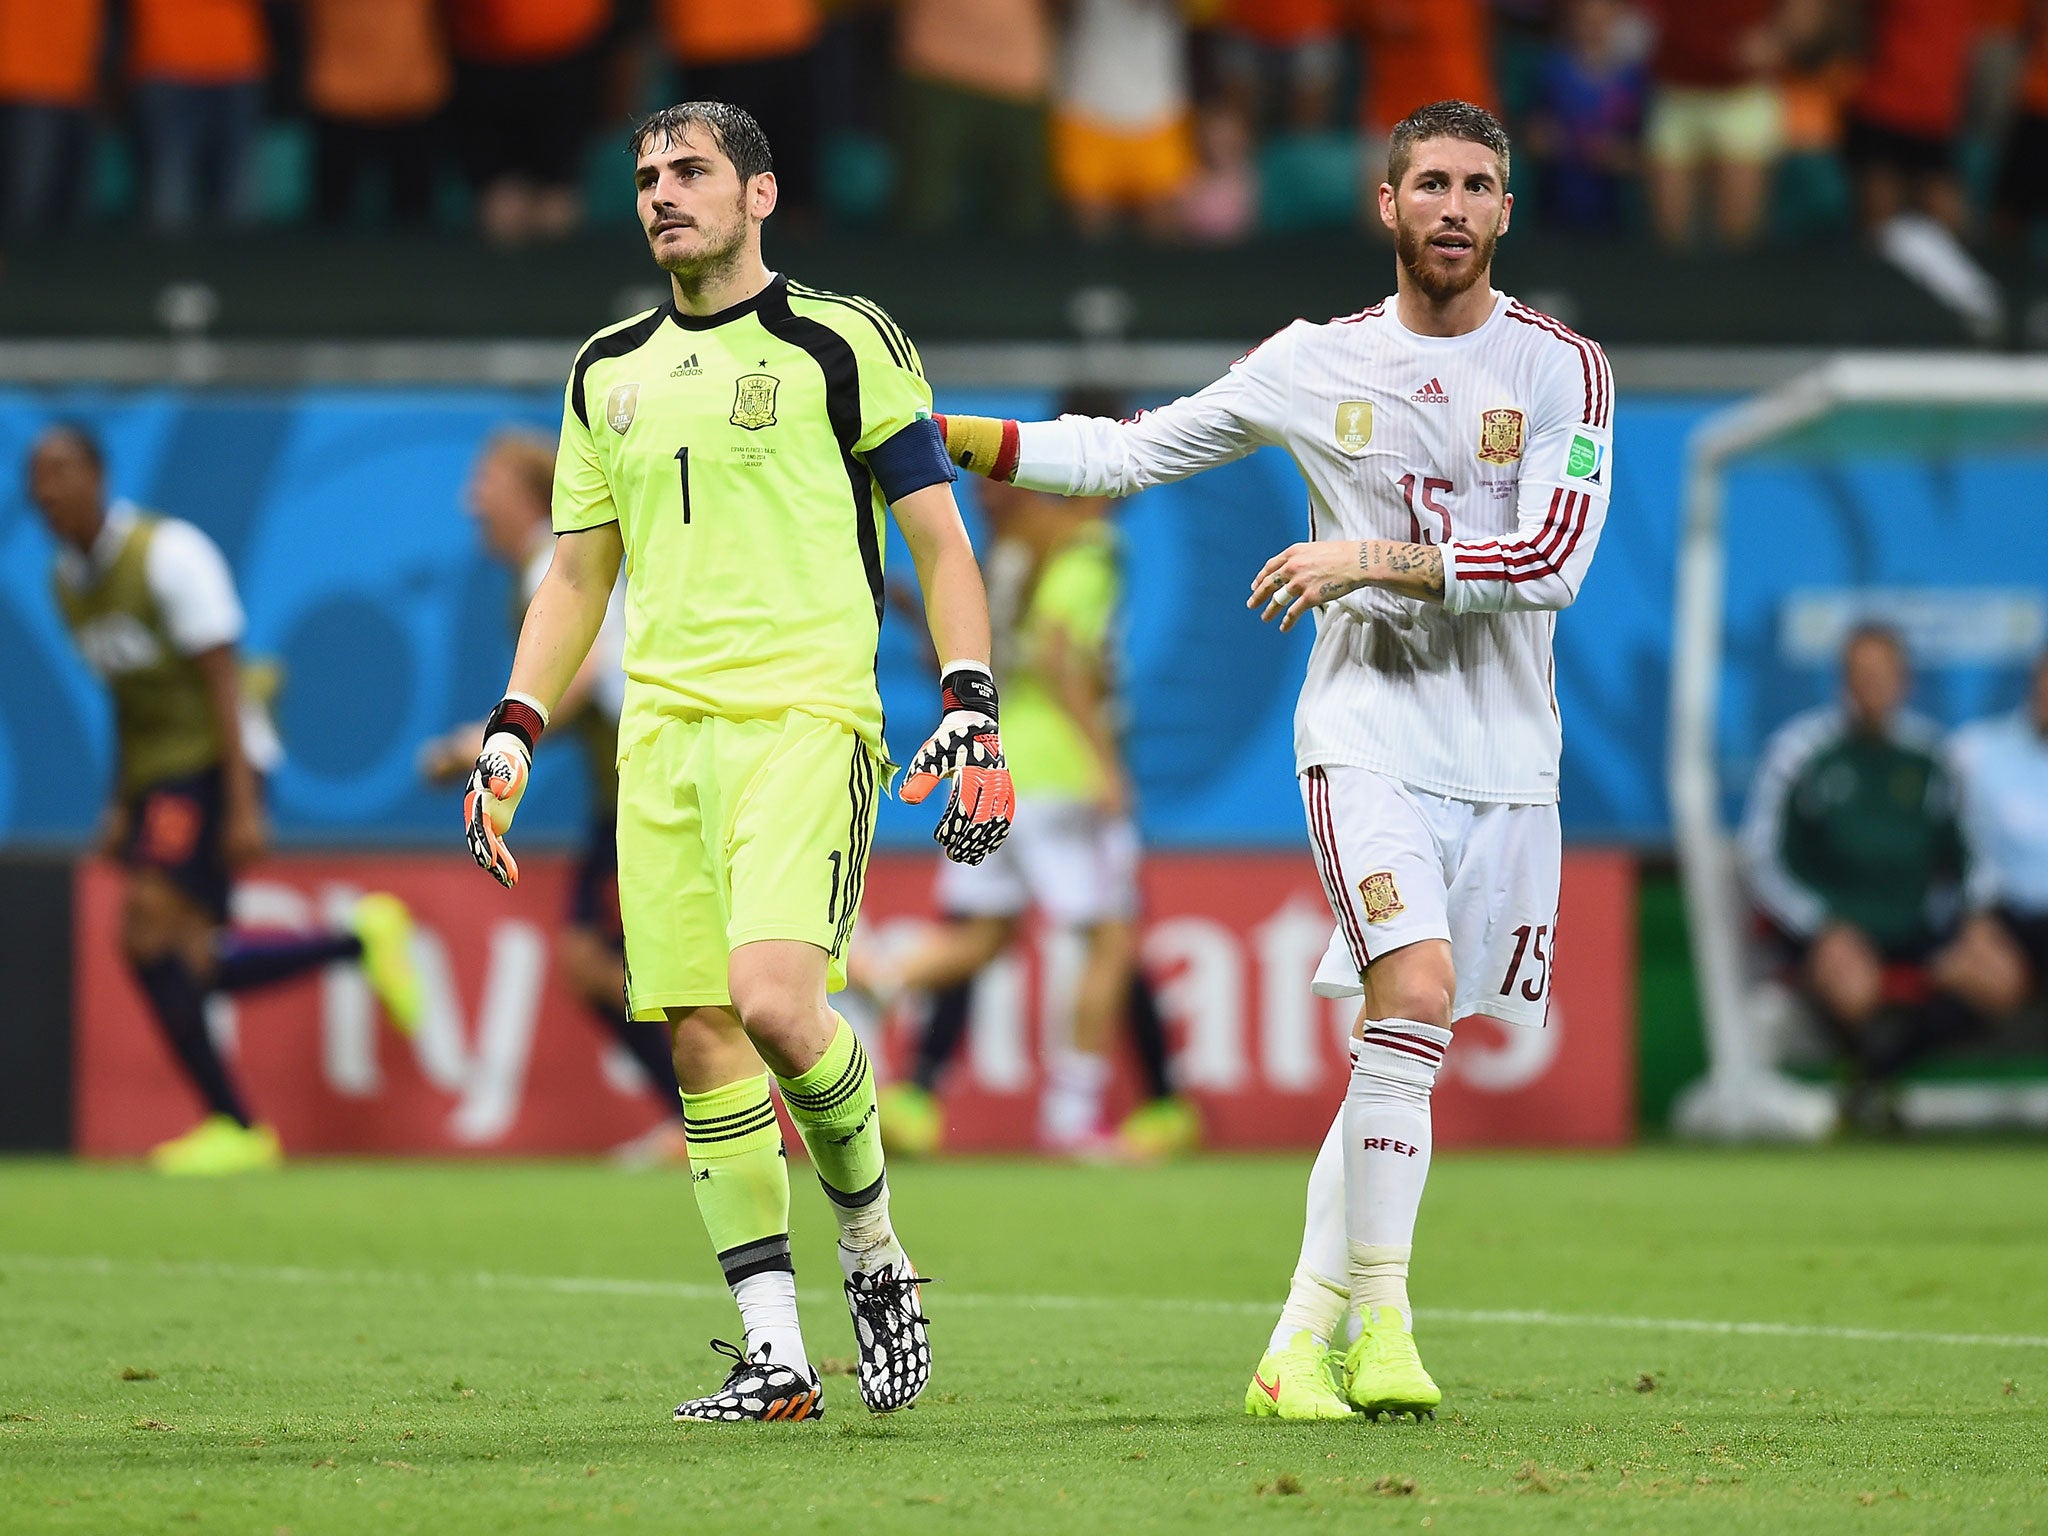 Iker Casillas is consoled by Sergio Ramos after conceding in the 5-1 defeat to the Netherlands